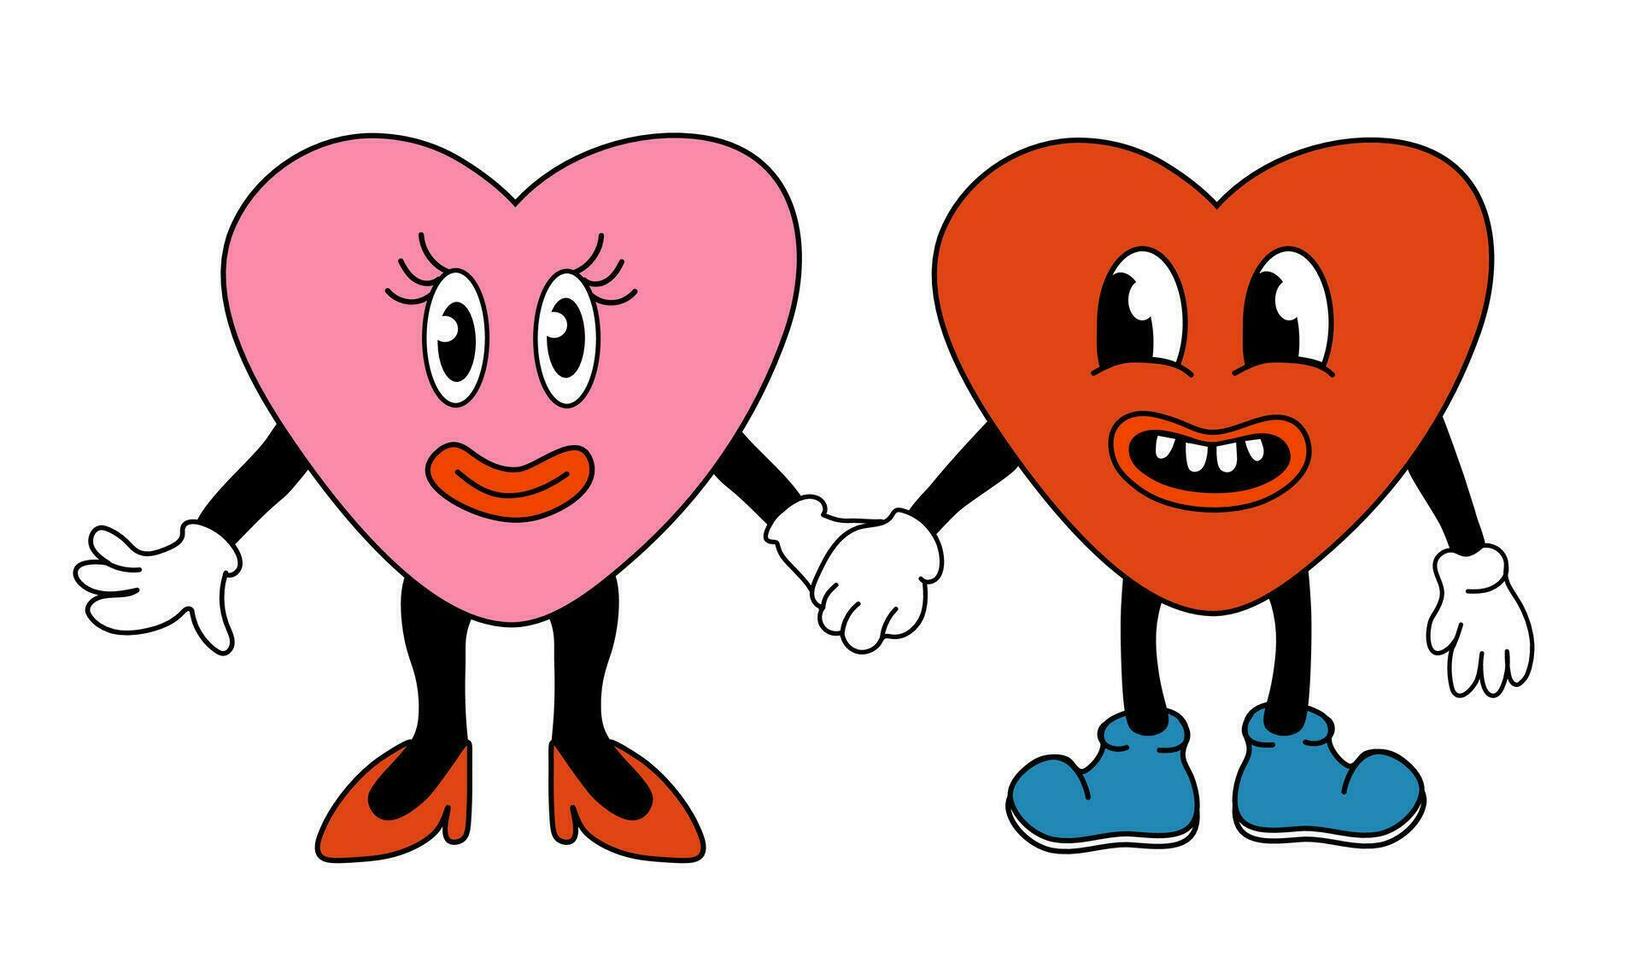 Retro 70s 60s 80s Hippie Groovy Valentine day lovely Hearts Characters. Girl and boy in love. Hold hand. Mascots in Funky trendy cartoon style. Vector flat illustration.